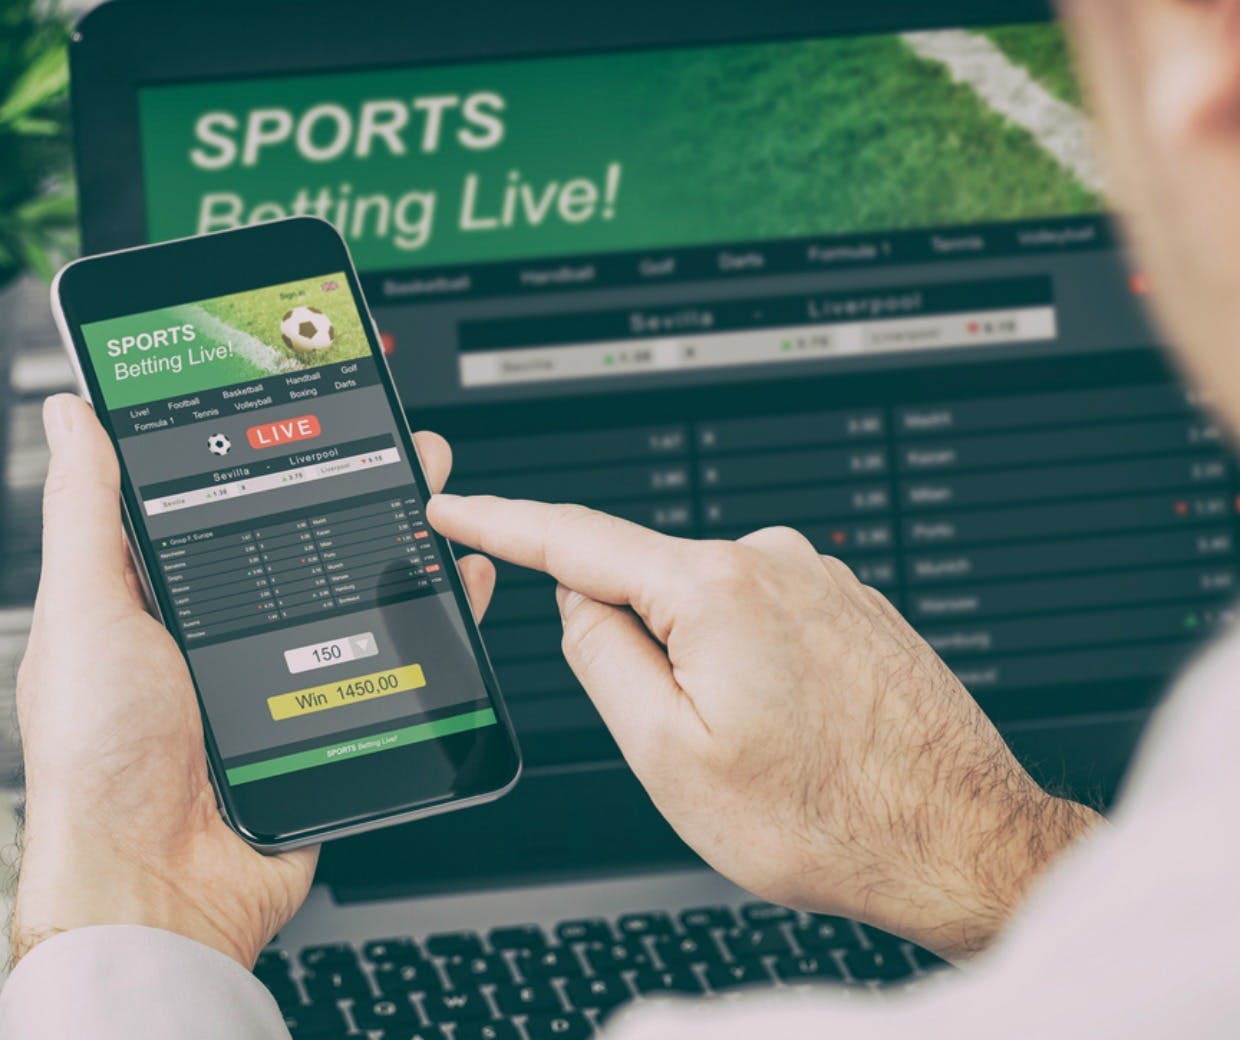 Marketing is fundamental to gambling so you need to bring your A-game – Marketing Week